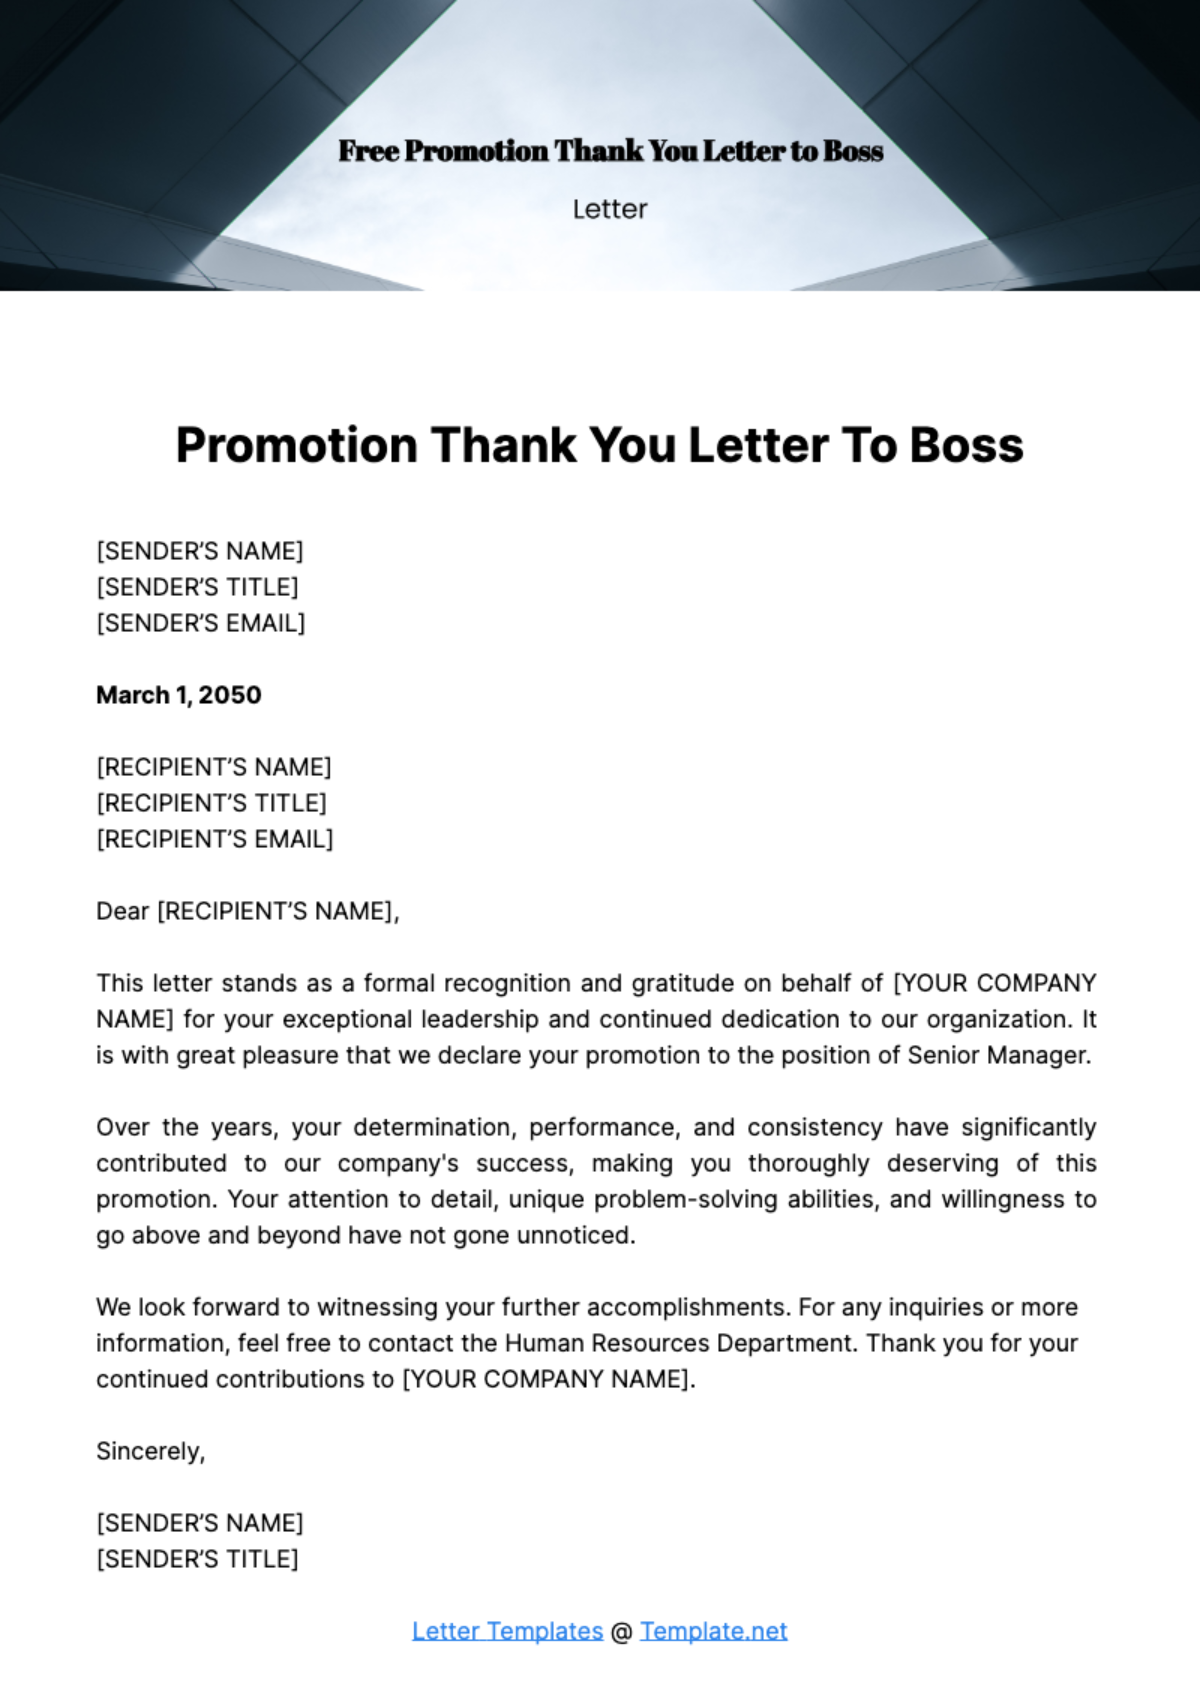 Promotion Thank You Letter to Boss Template